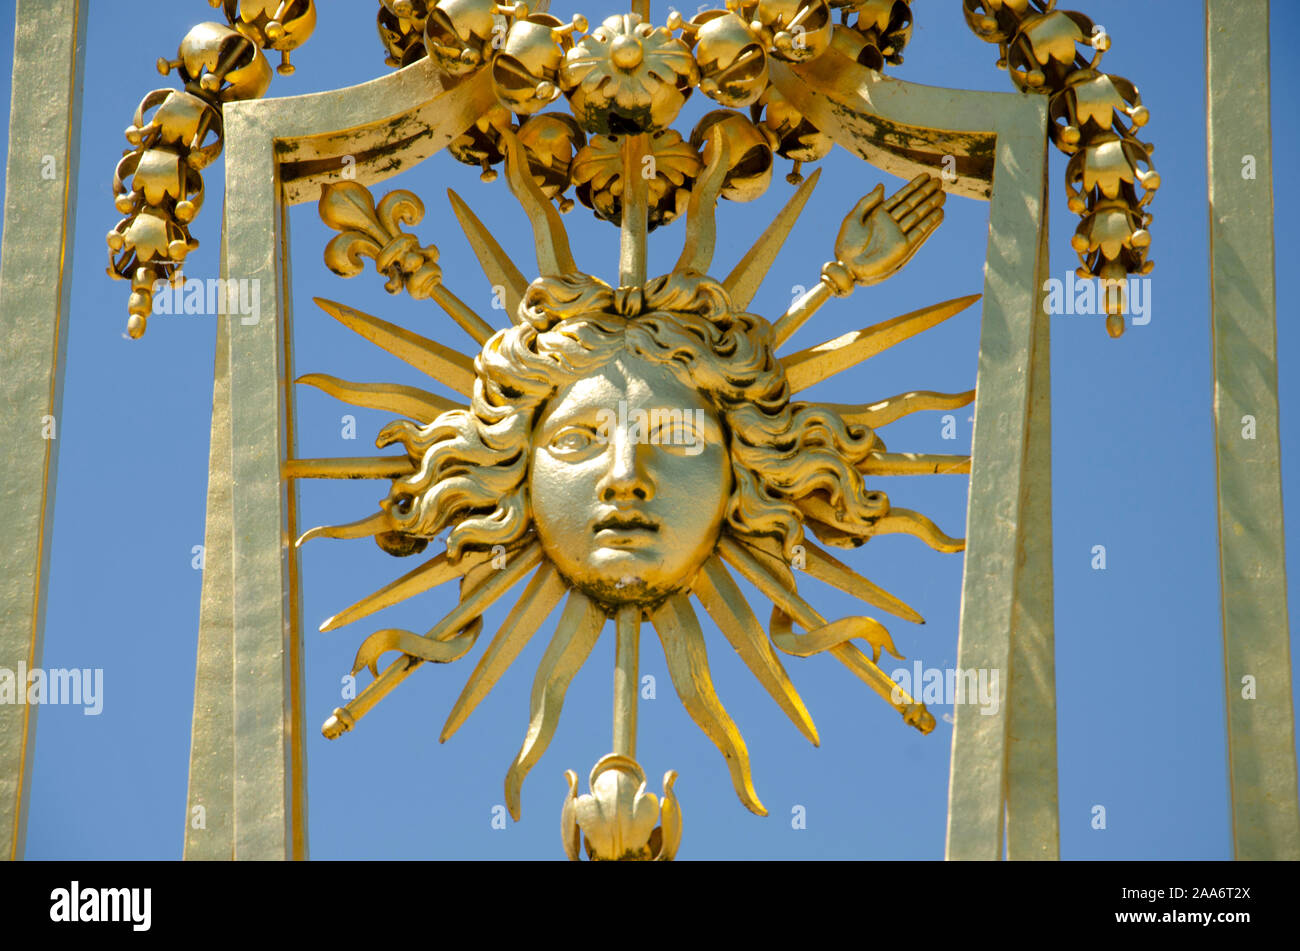 Details of the sun symbol in golden exterior fence at the facade of the palace, Versailles, France, Europe Stock Photo